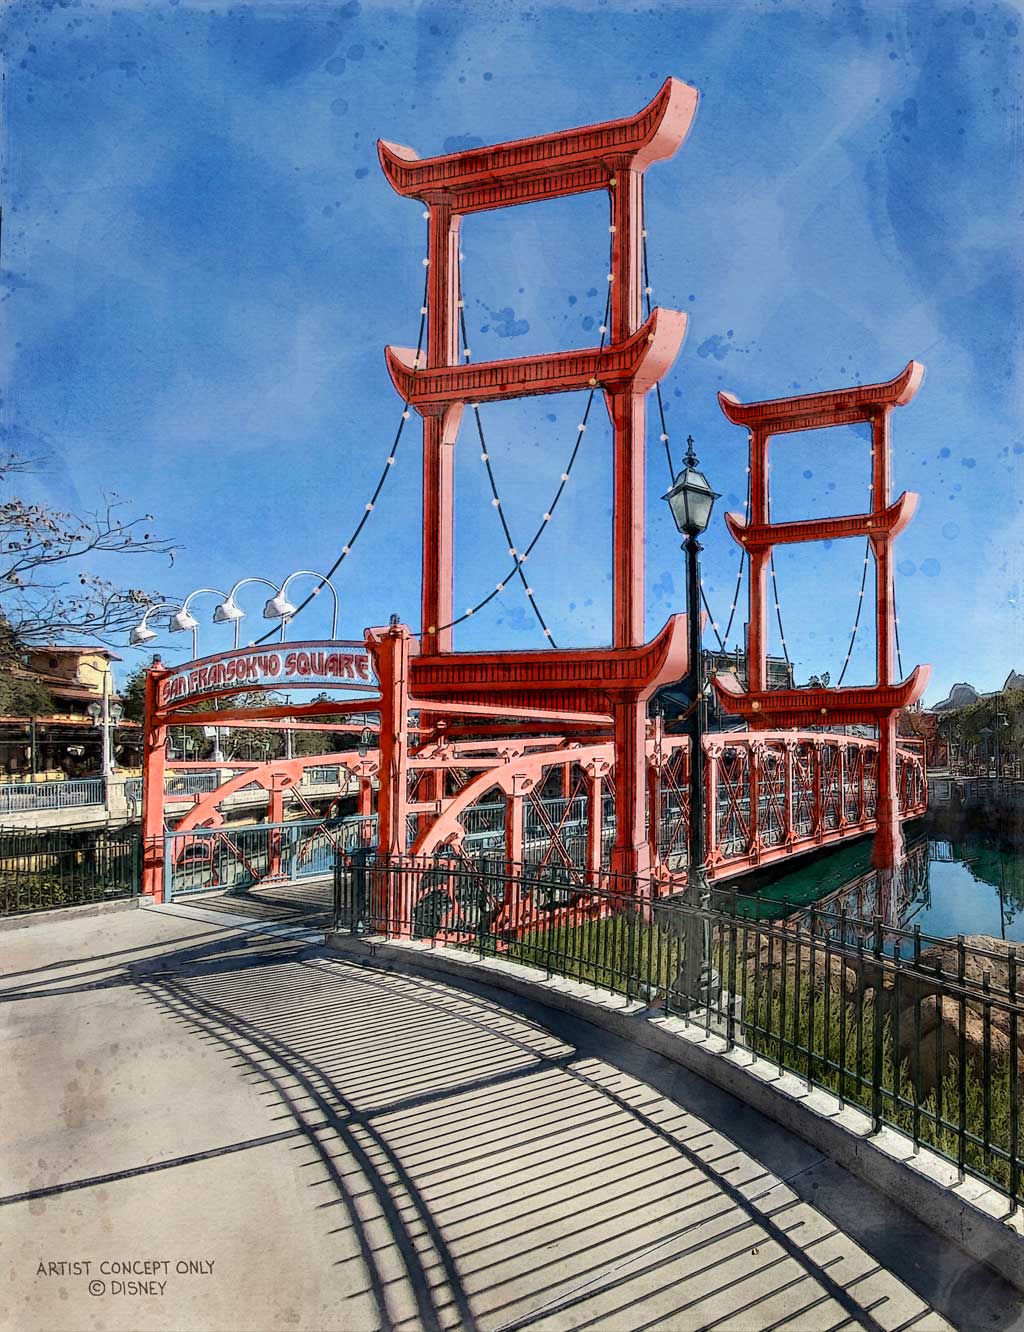 When the transformation to San Fransokyo Square is completed in summer 2023, an iconic landmark of the area will be the San Fransokyo Gate Bridge (depicted here), which will span the tide pools linking San Fransokyo Square to the Paradise Gardens Park obelisk. The Pacific Wharf is currently undergoing an exciting transformation into San Fransokyo Square, inspired by Walt Disney Animation Studios’ Academy Award®-winning “Big Hero 6.” (Artist Concept/Disneyland Resort)